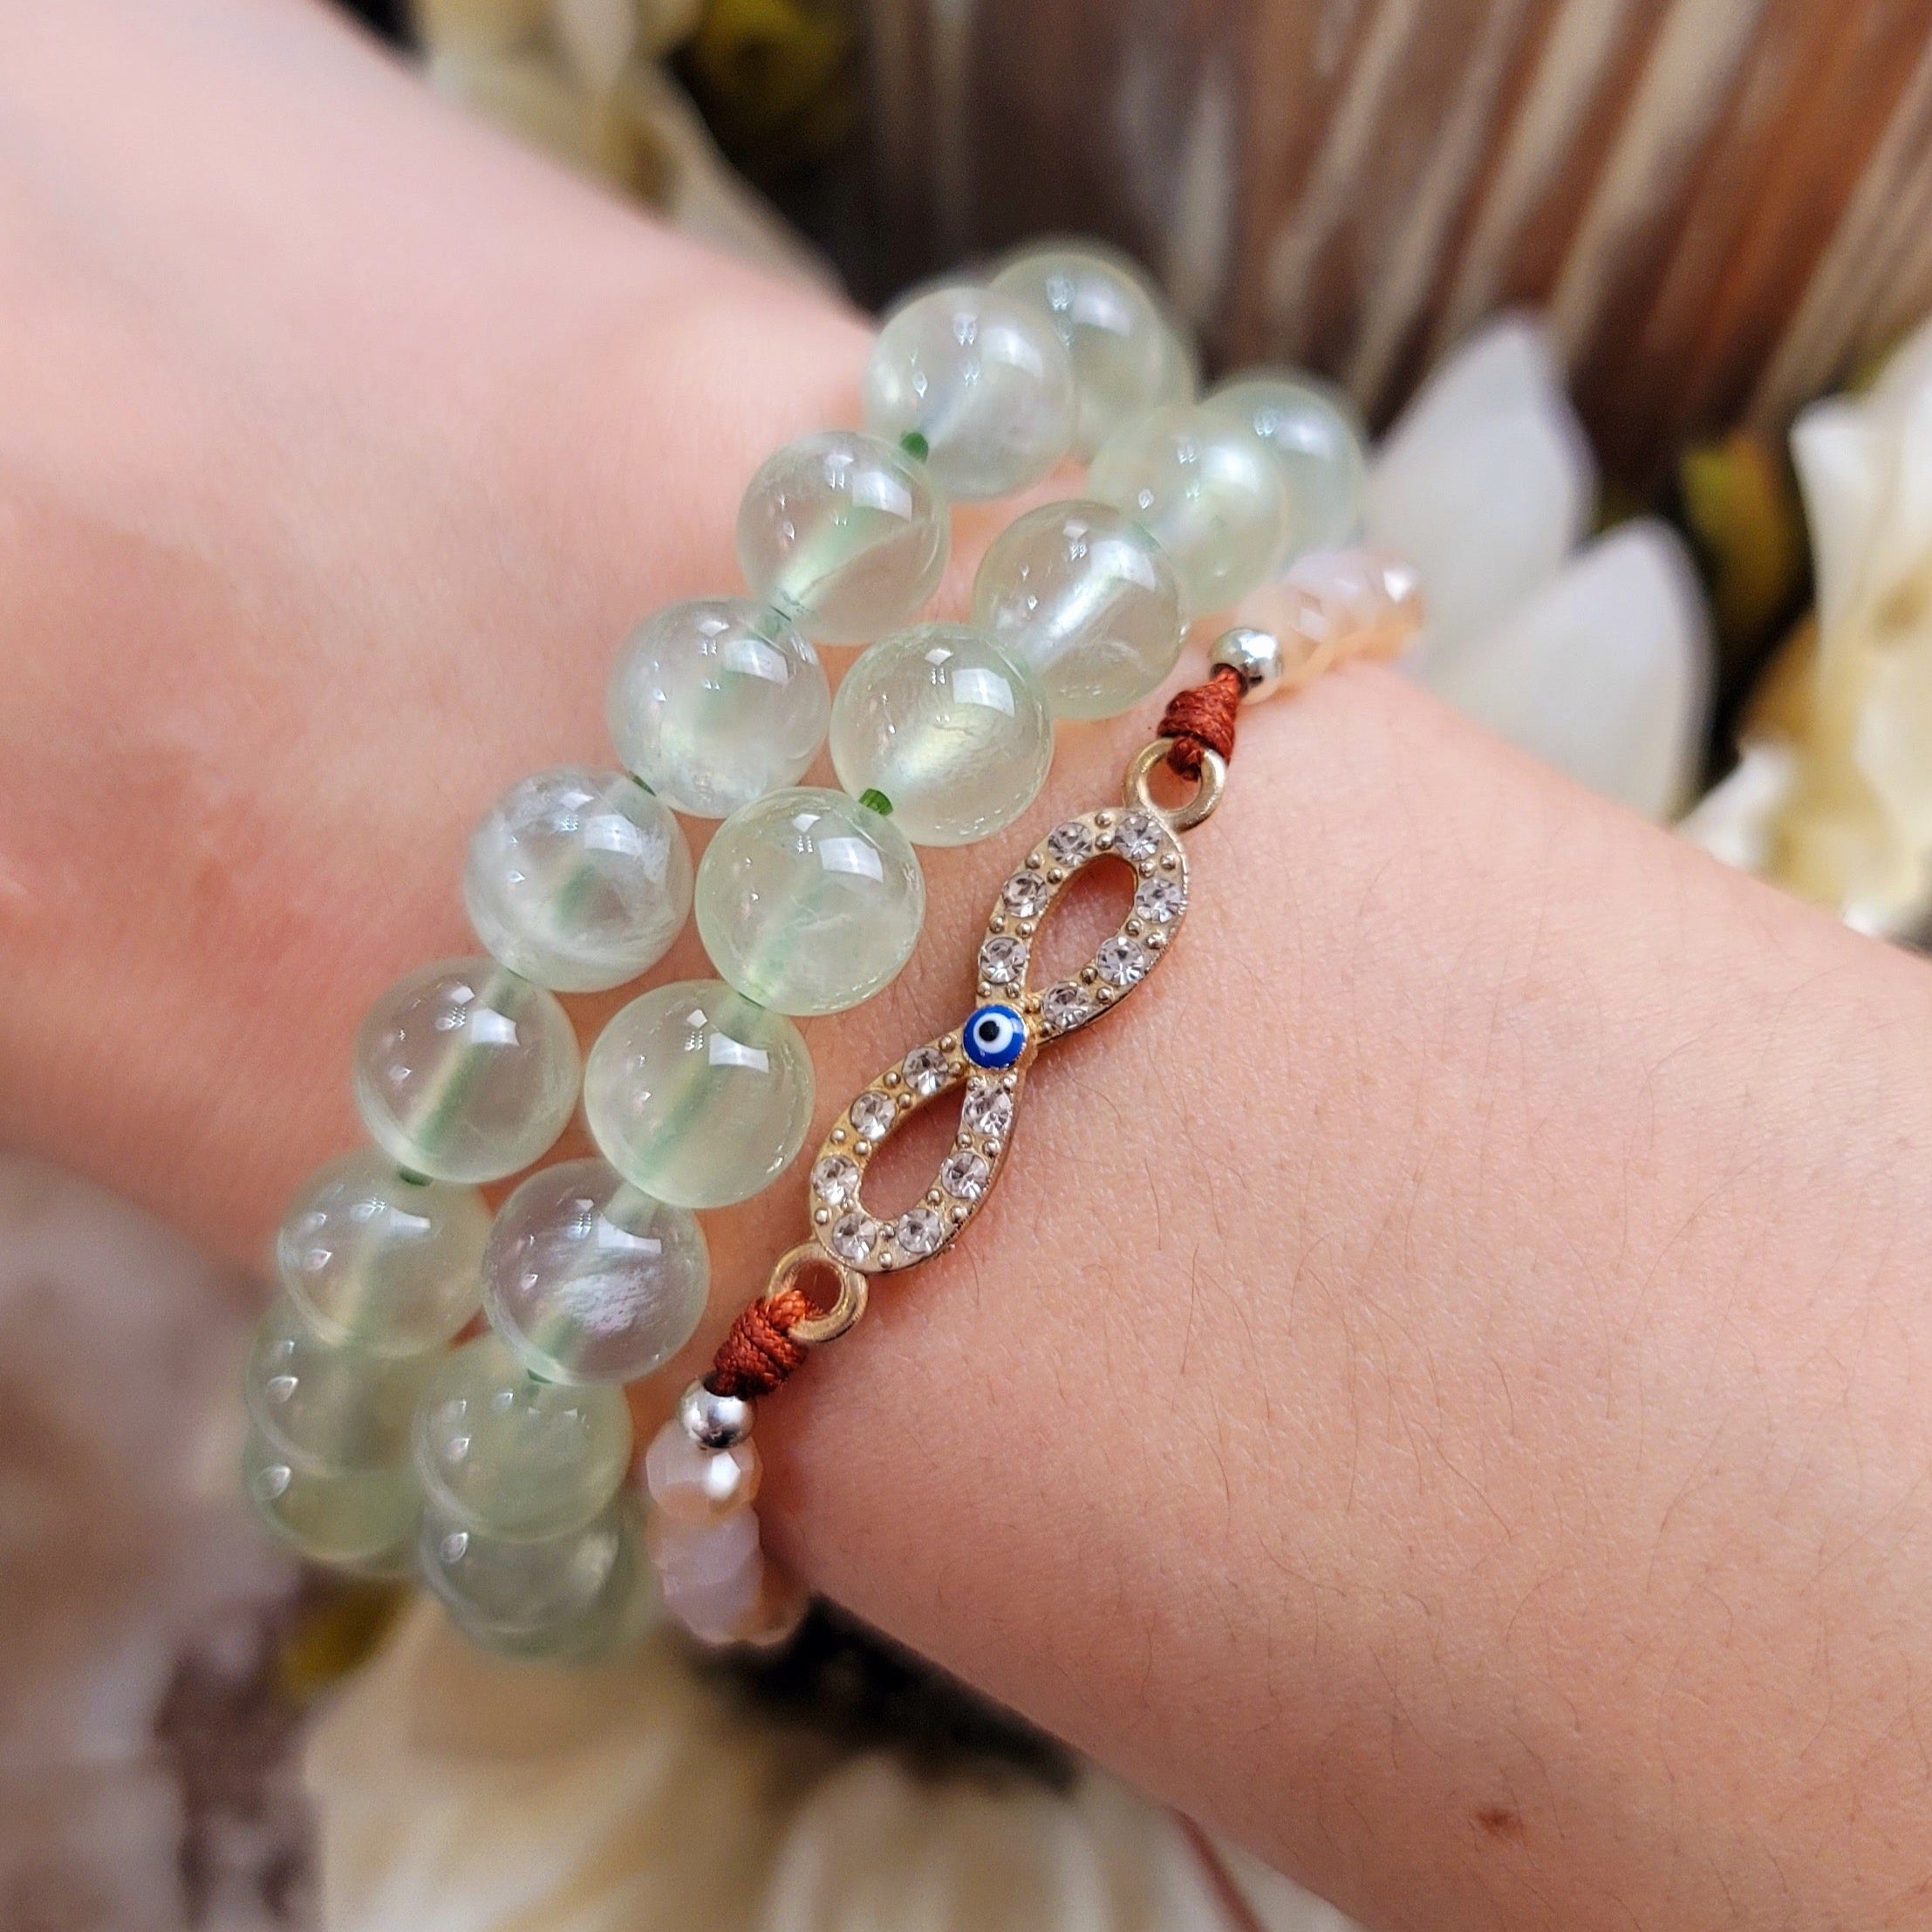 Prehnite Bracelet (High Quality) for Peace & Support through Times of Change